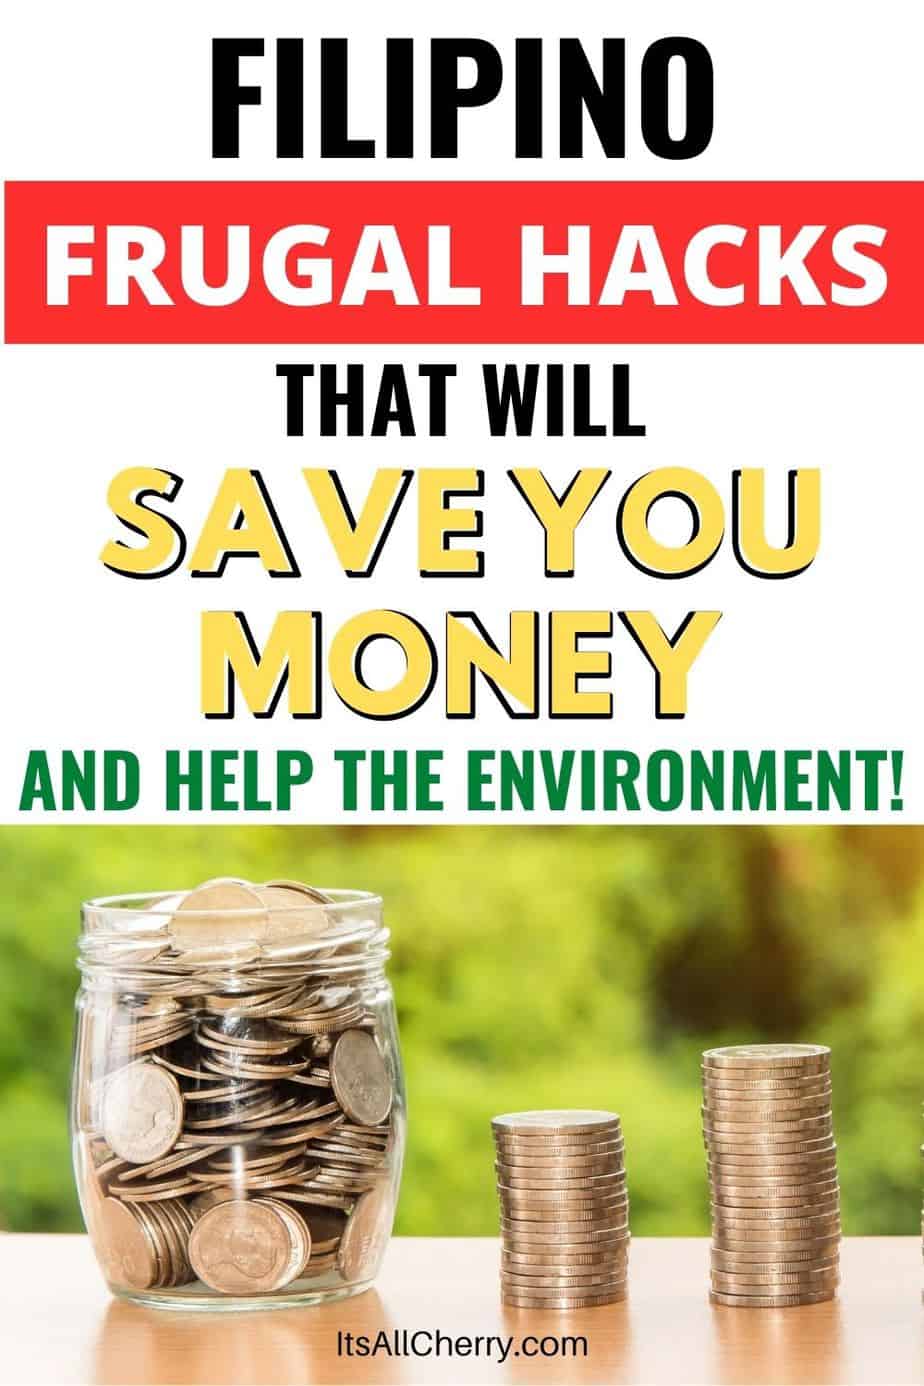 Filipino Frugal Hacks That Will Save You Money (And Help The Environment!)